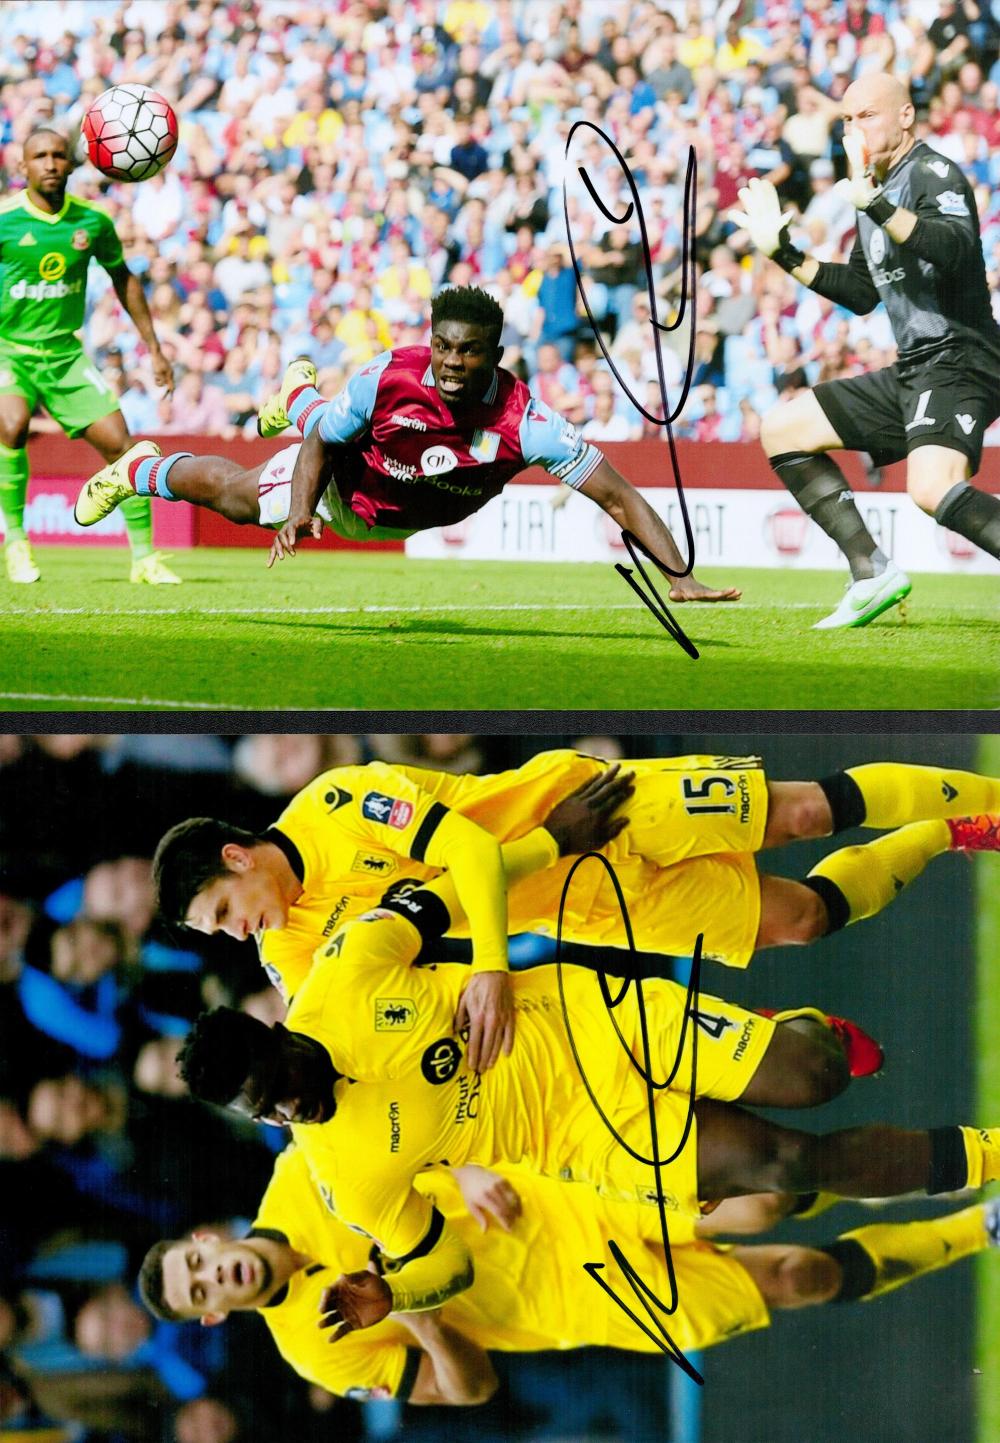 Football Collection of Micah Richards Aston Villa. 2 signed photos of Micah Richards in action